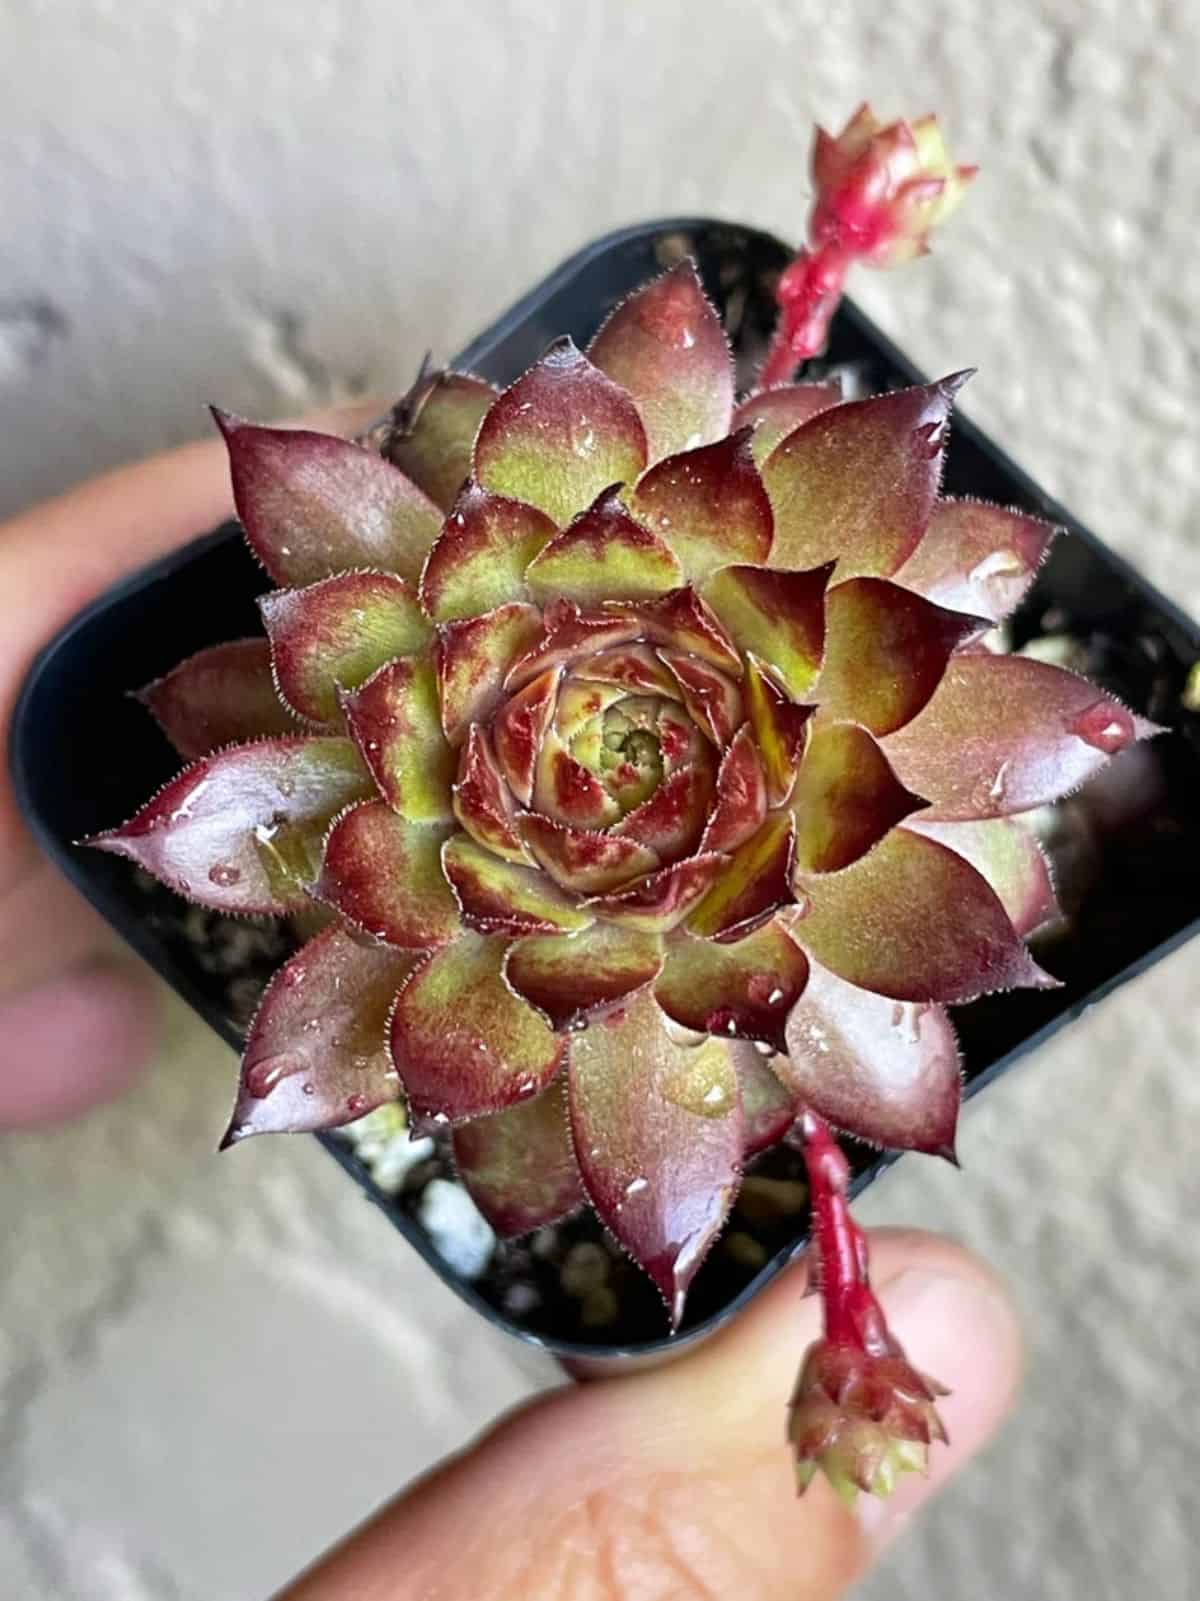 Sempervivum Black Rose grows in a plastic pot held by hand.